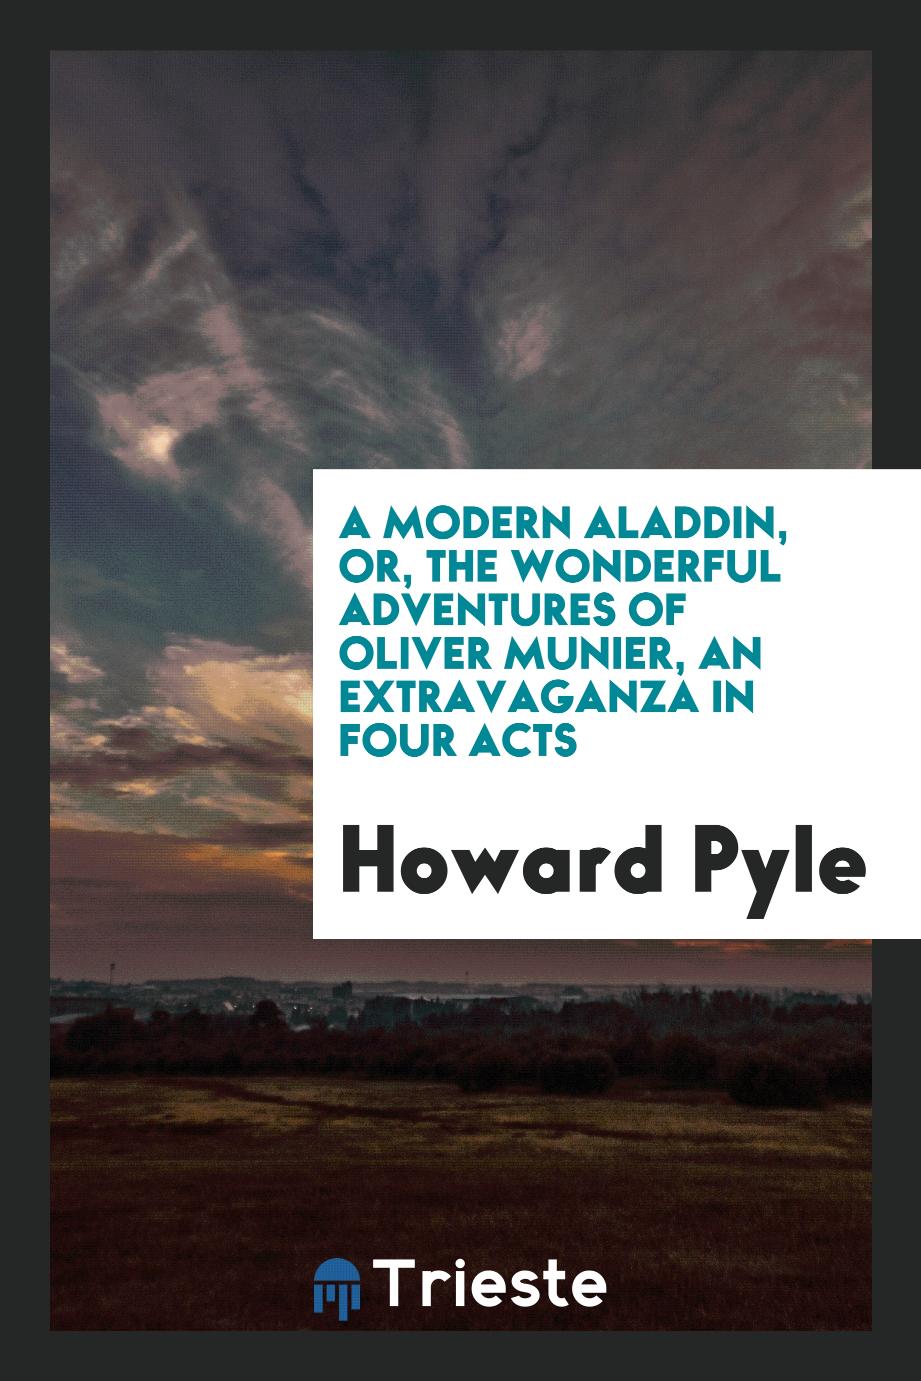 A modern Aladdin, or, The wonderful adventures of Oliver Munier, an extravaganza in four acts